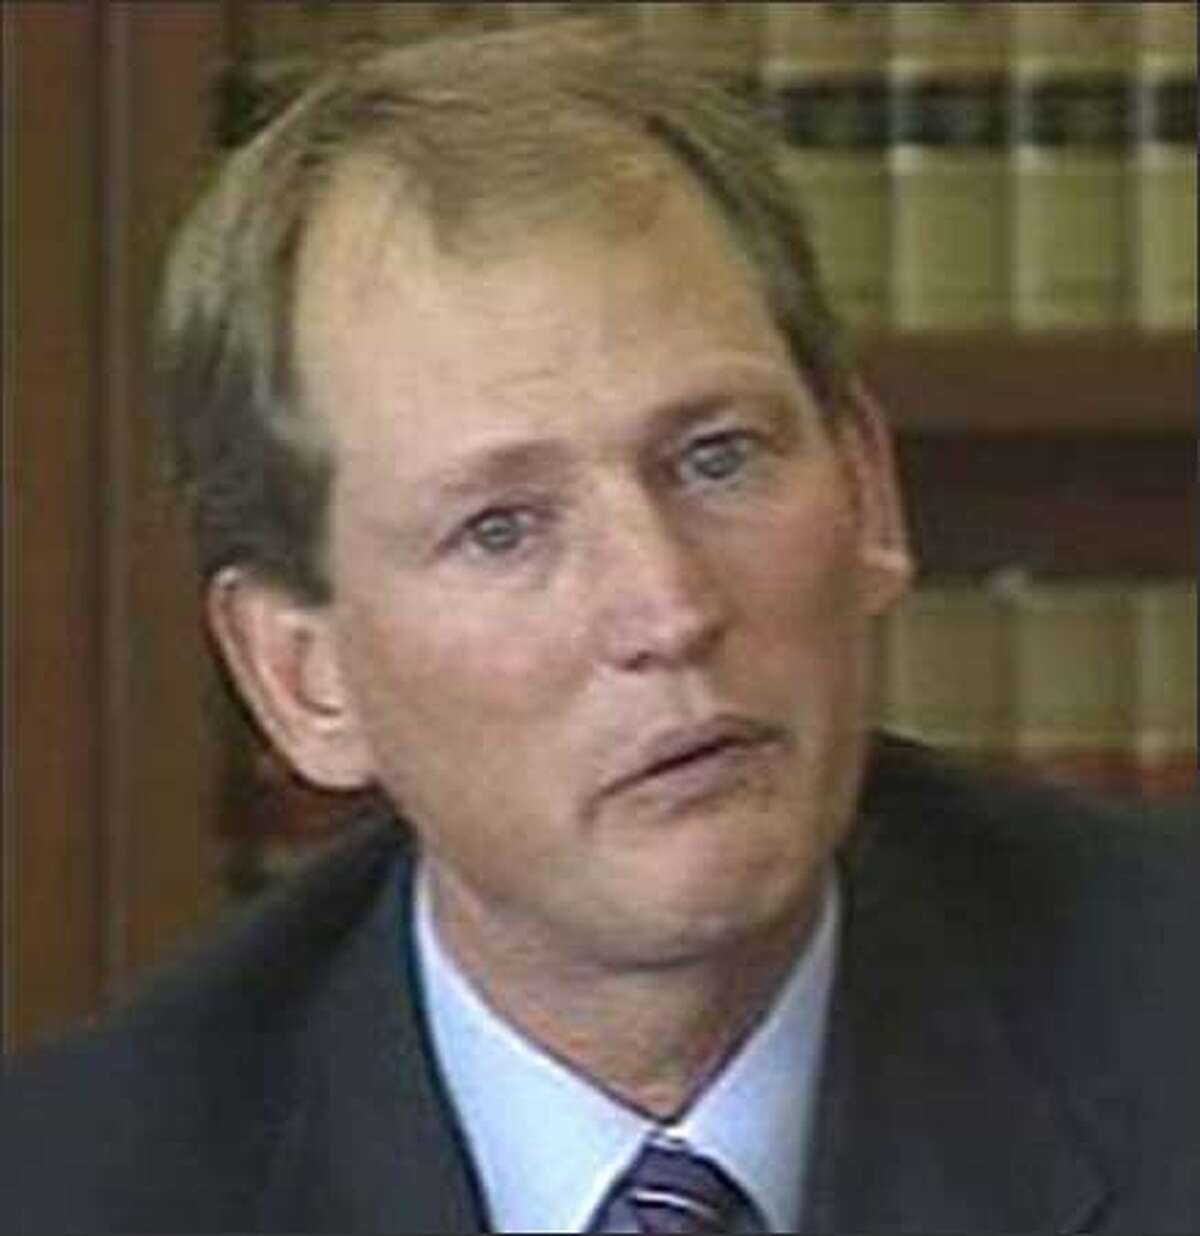 Former UW Coach Rick Neuheisel cries on the witness stand; photo taken from video.